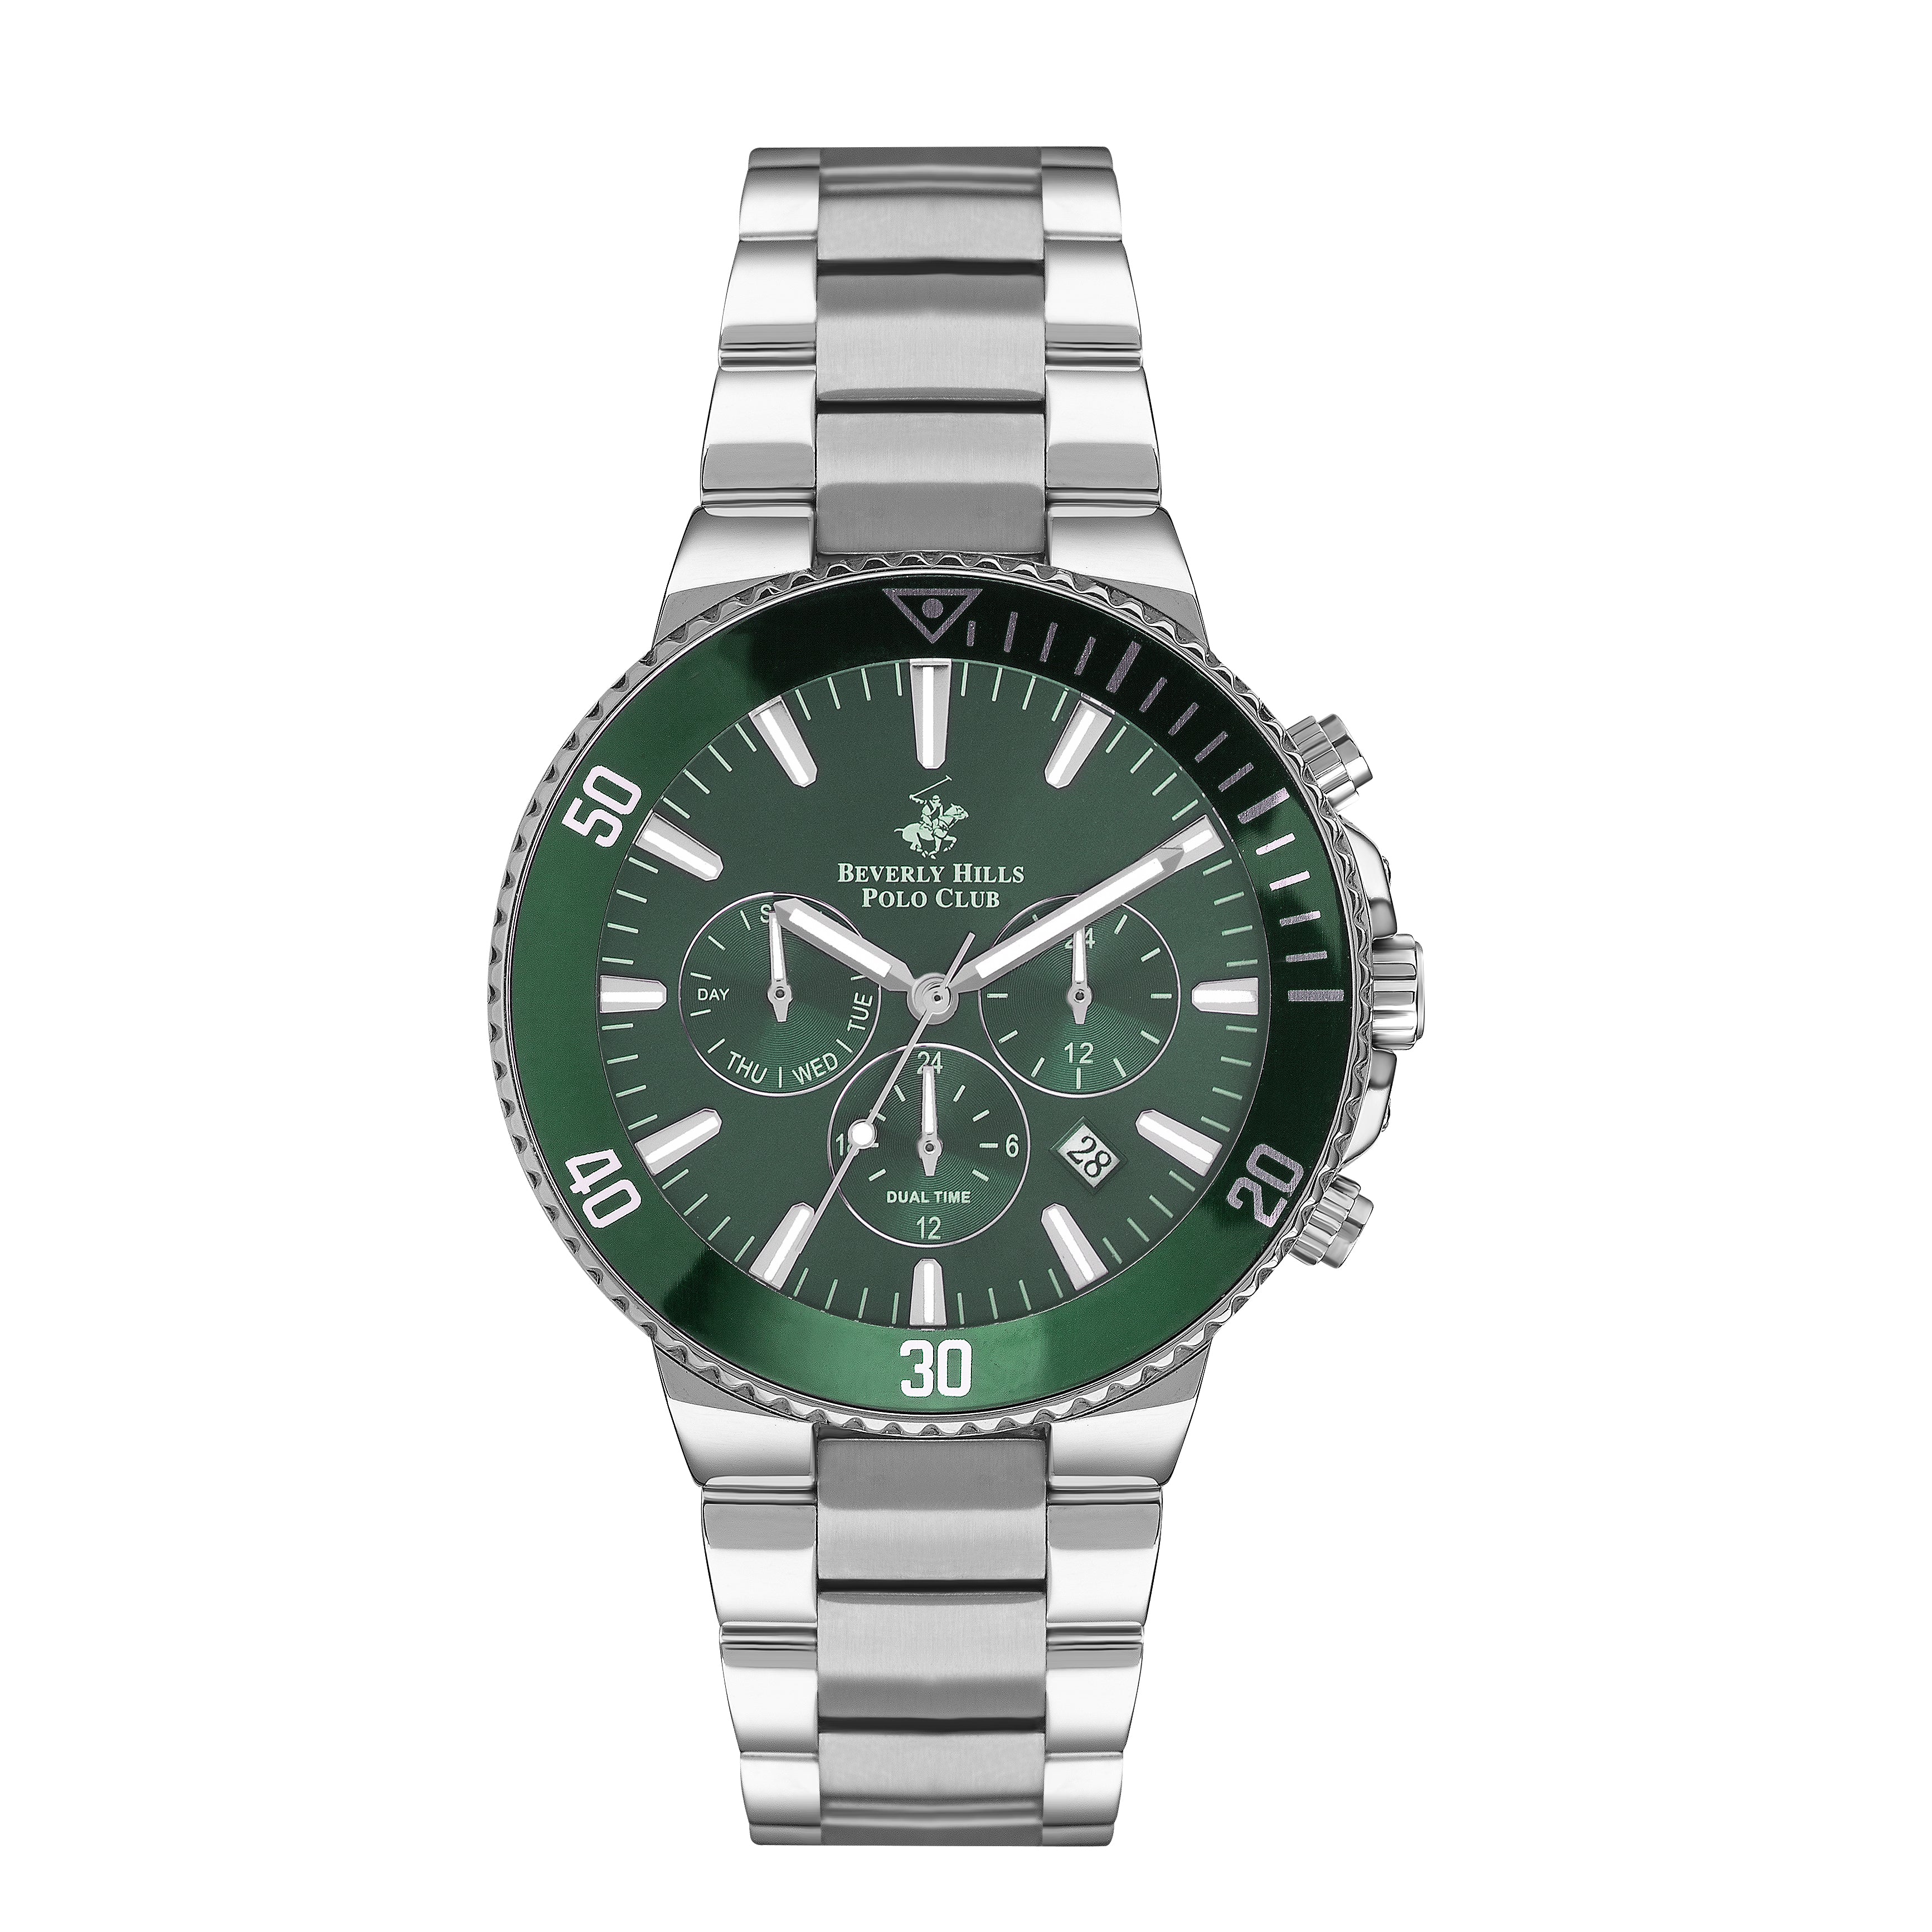 Polo - BP3247X.370 - Mens Stainless Steel Watch